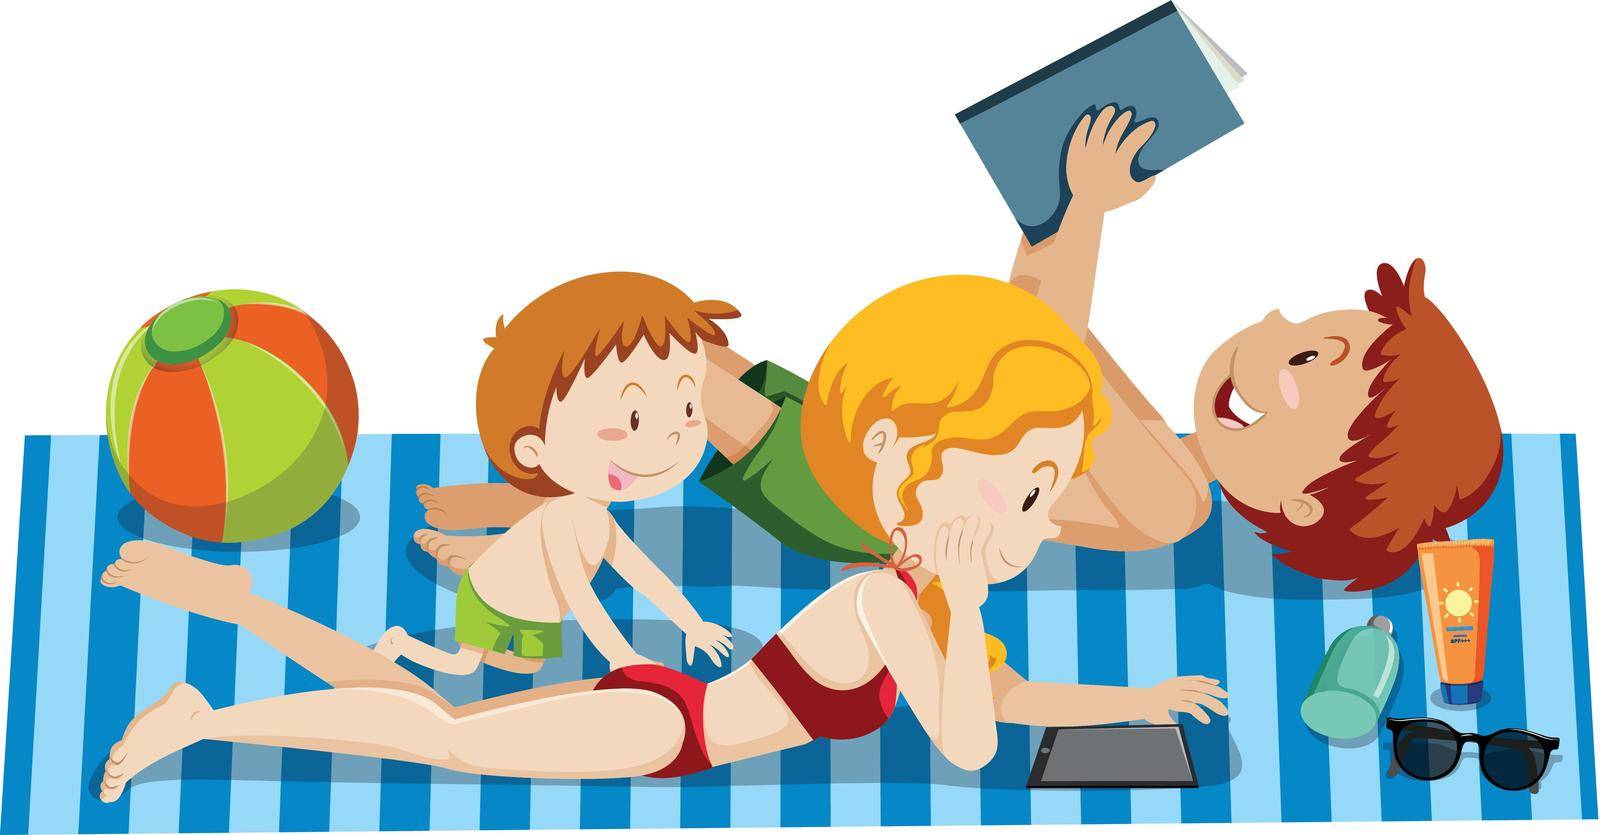 A Family on Summer Holiday illustration